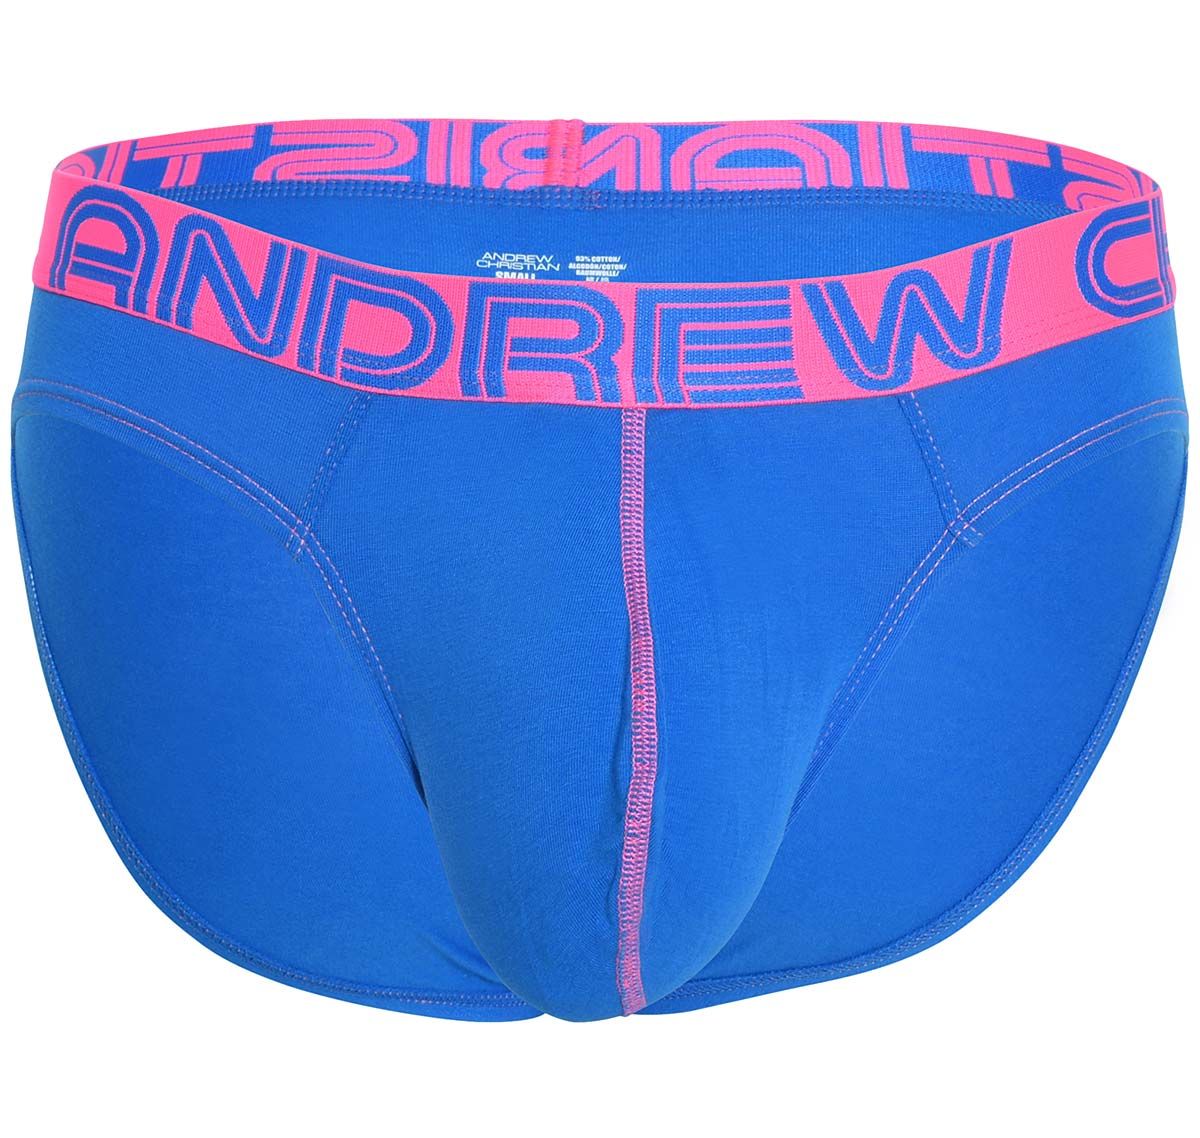 Andrew Christian Slip HAPPY BRIEF w/ Almost Naked 92528, azul